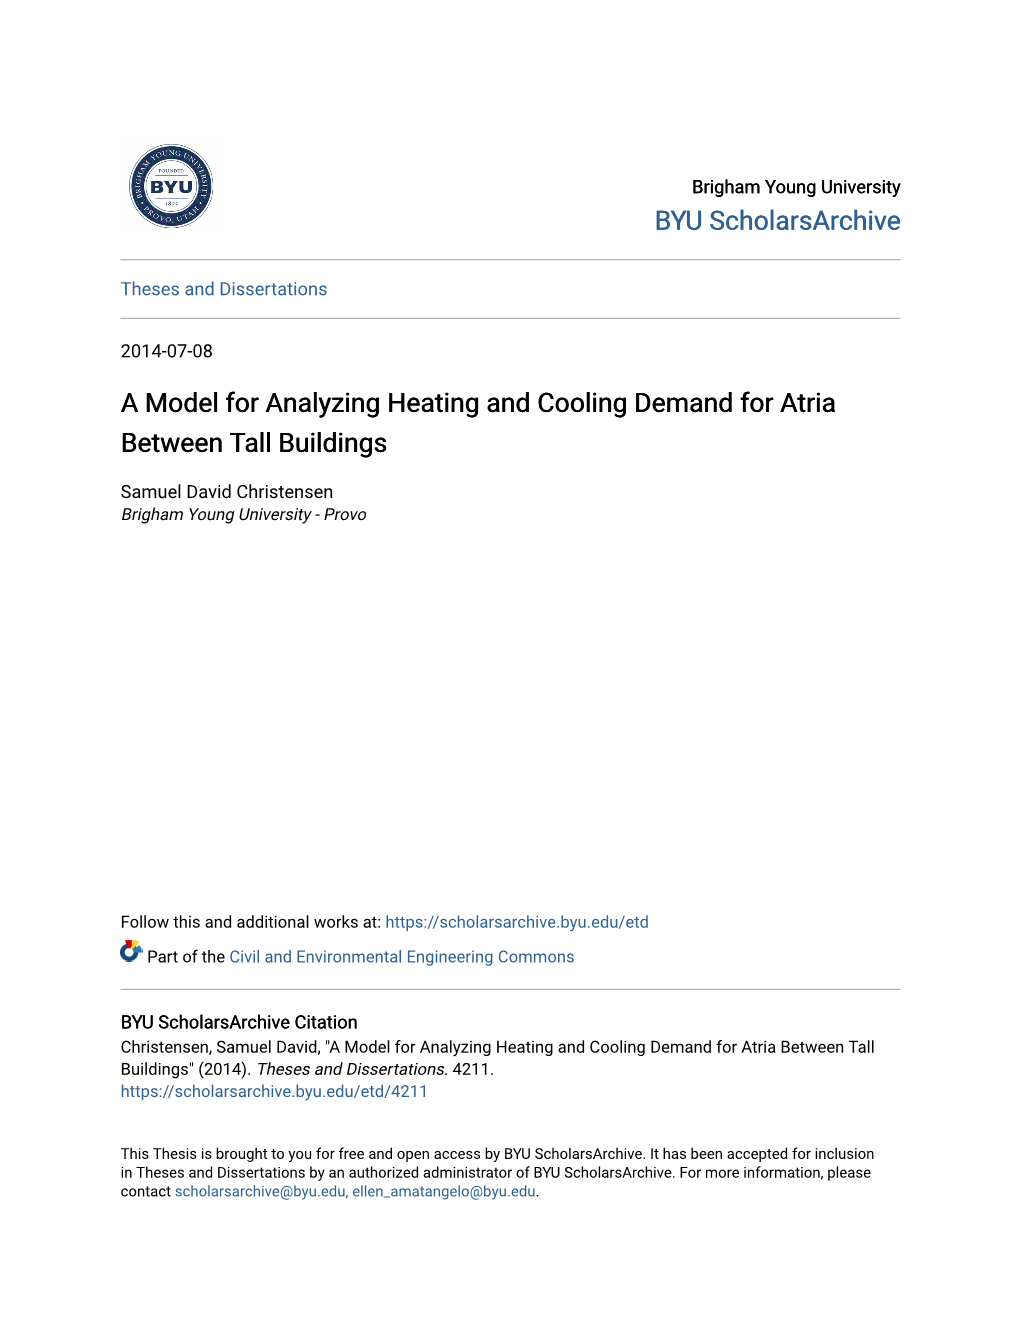 A Model for Analyzing Heating and Cooling Demand for Atria Between Tall Buildings